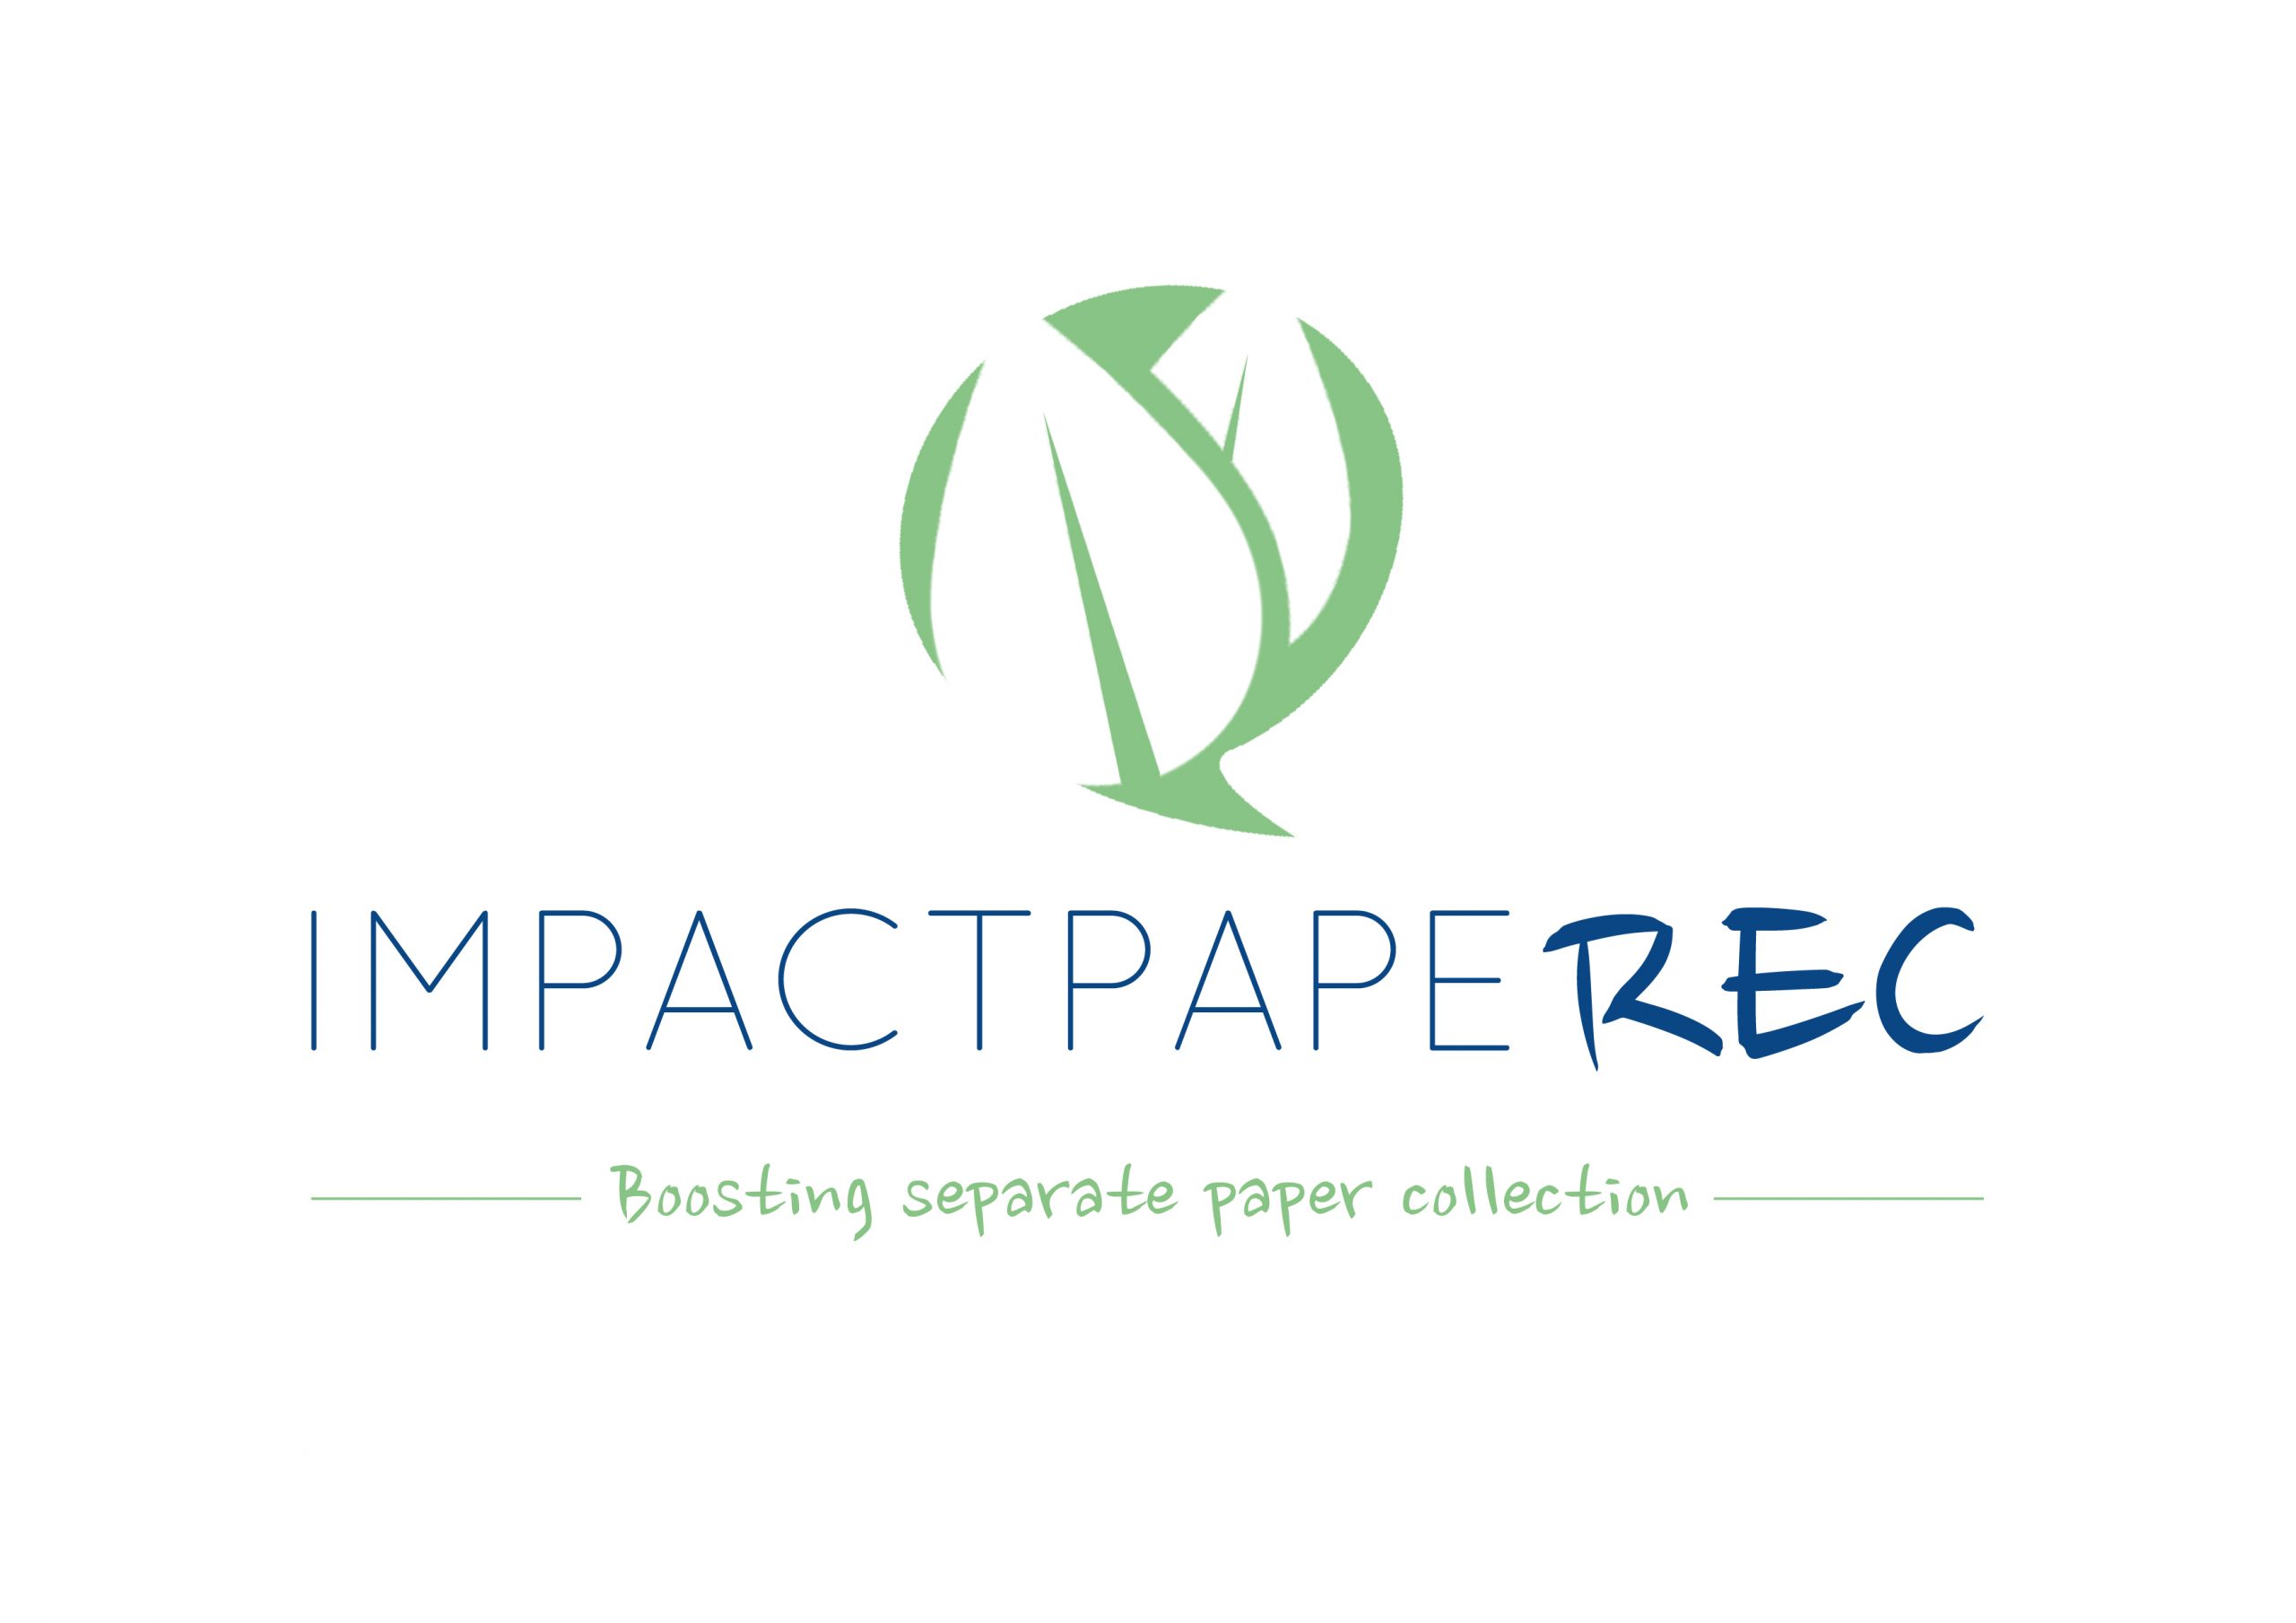 IMPACTPapeRec project sends strong Circular Economy message on separate collection of paper at final conference